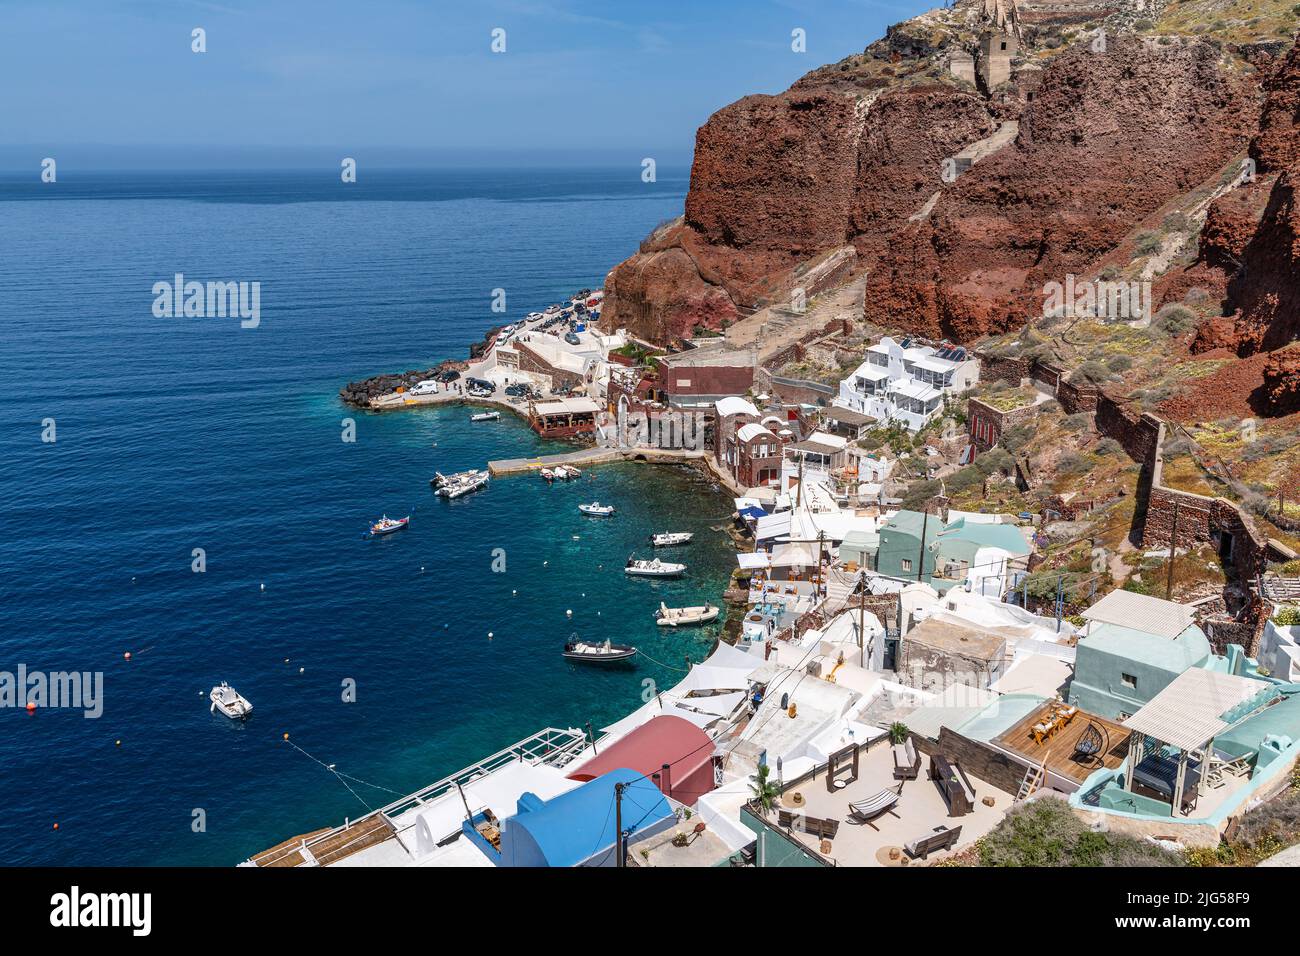 View of Amoudi Bay in Oia, famous for its fish restaurants along the sea, Santorini, Greece Stock Photo